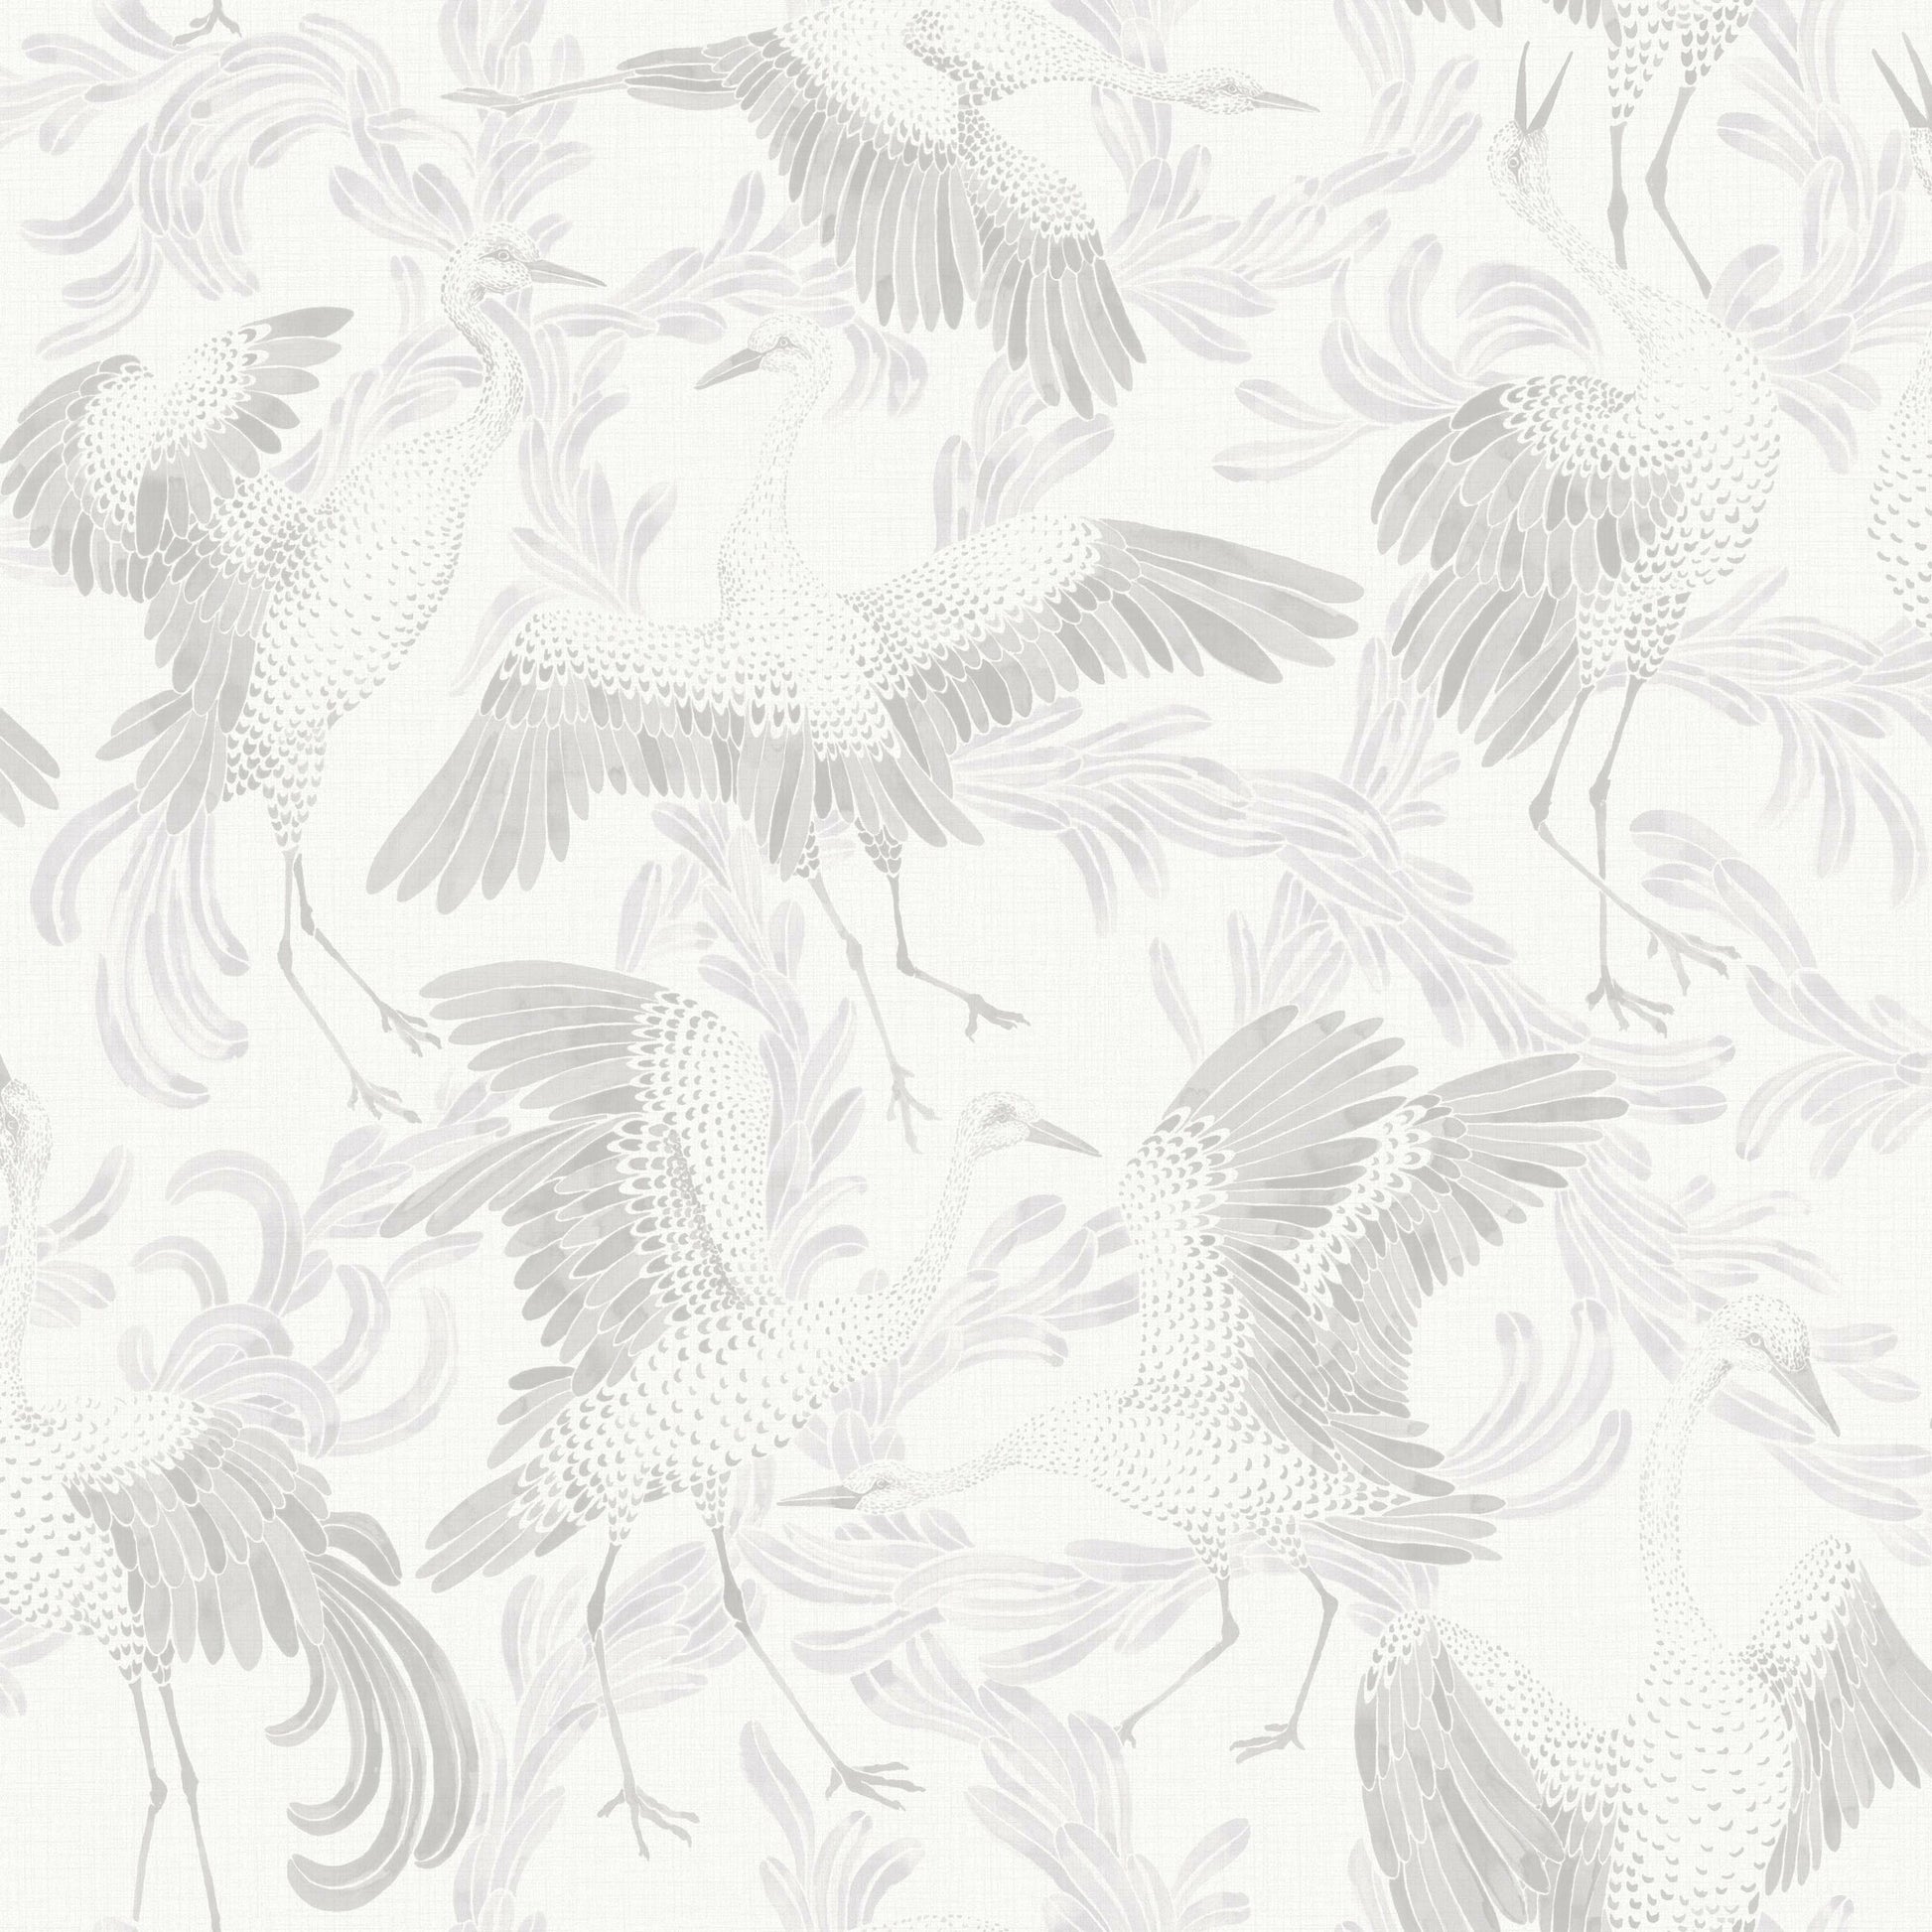 Coloured in authentically age-faded shades of white, sepia and beige, our Dancing Crane wallpaper adds a touch of vintage elegance to the interiors it adorns. 